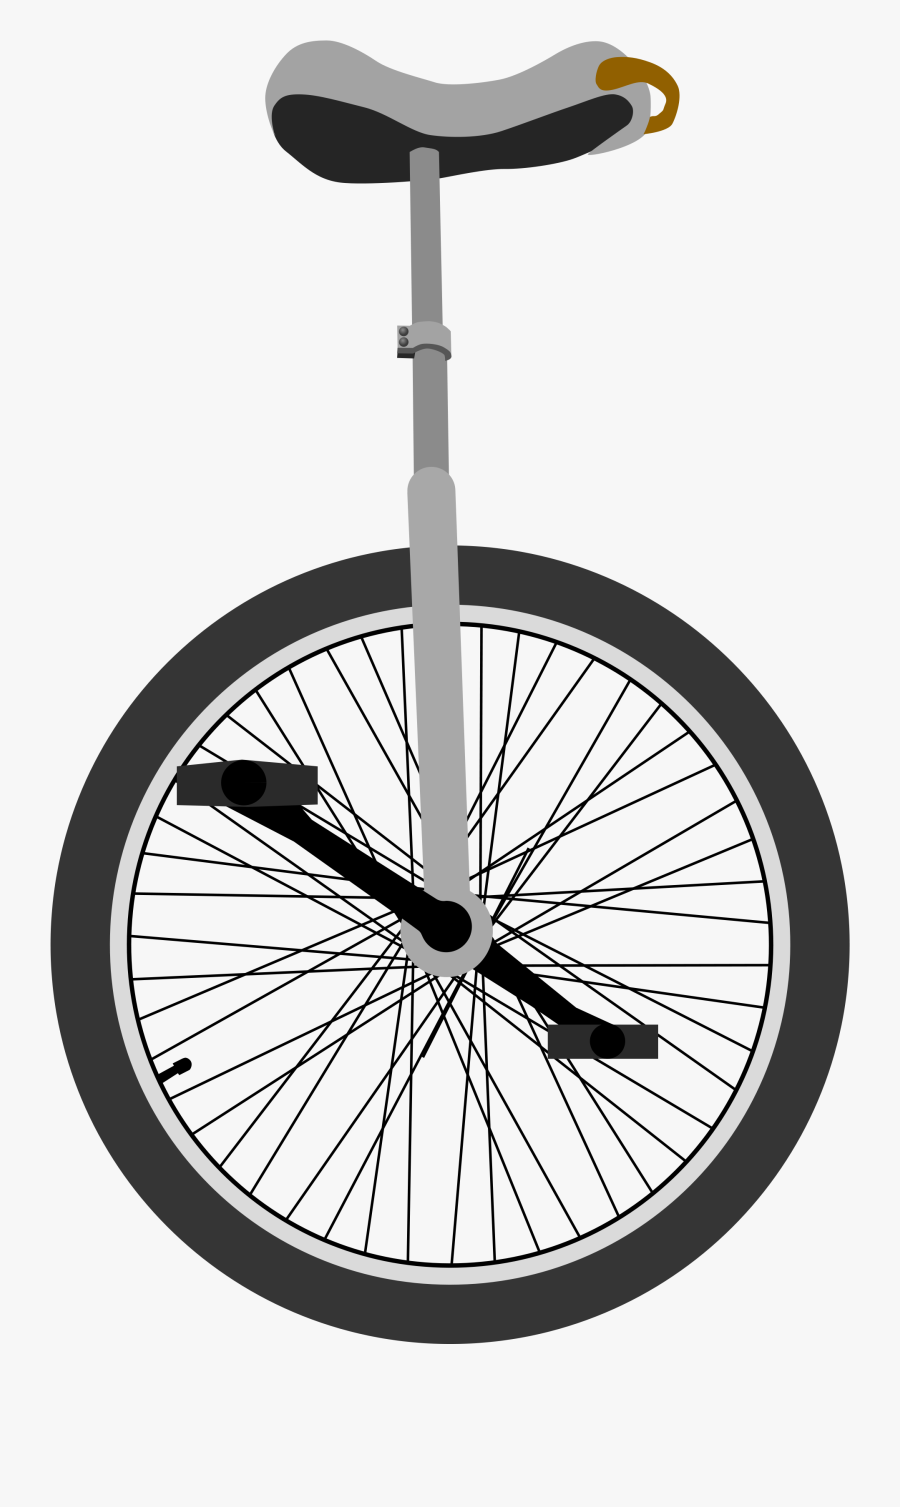 Clip Art File Svg Wikimedia Commons - Unicycle Transparent, Transparent Clipart